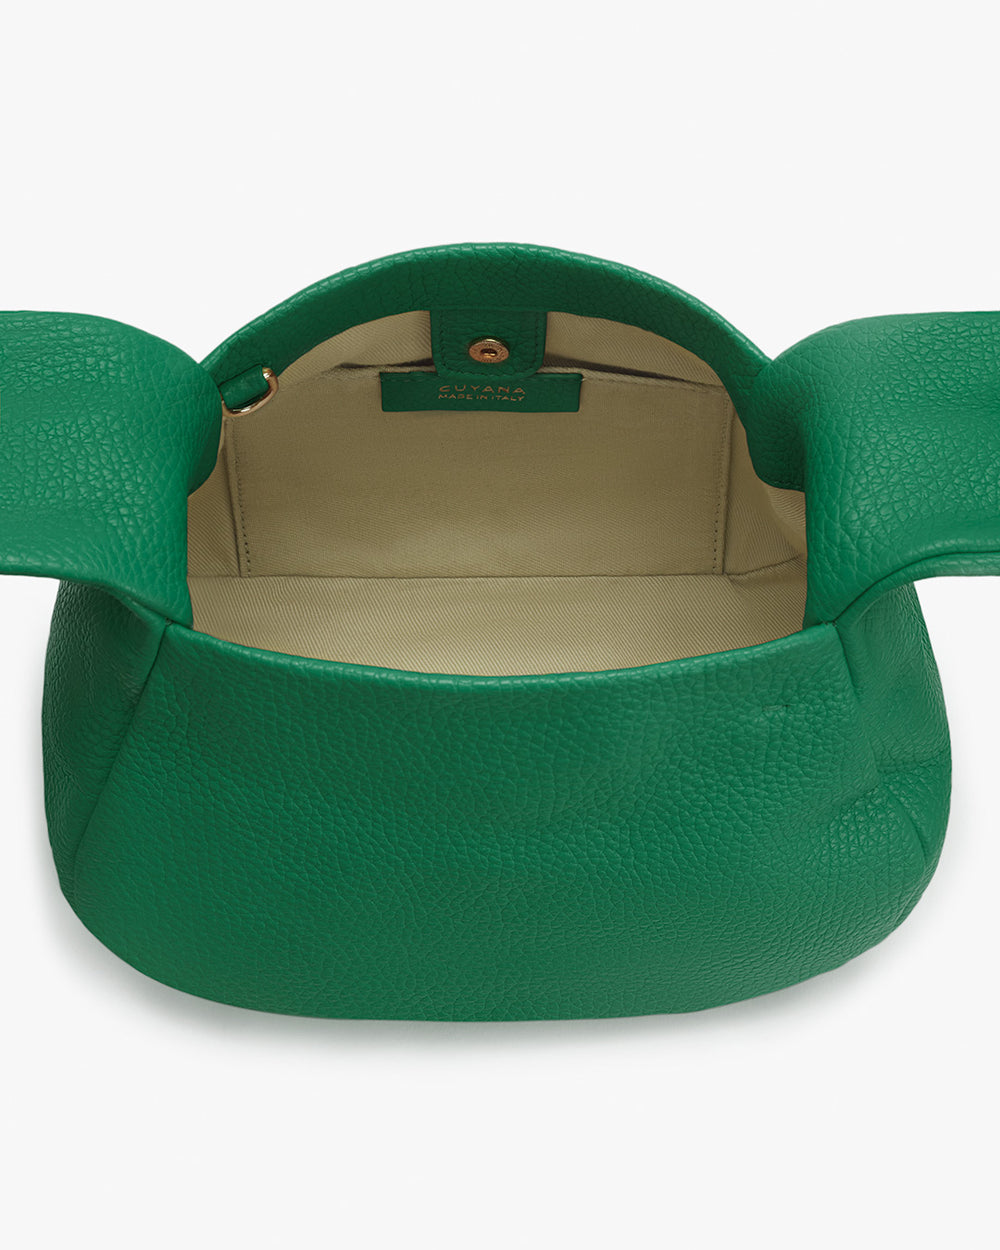 Open top view of a spacious, round-shaped handbag.